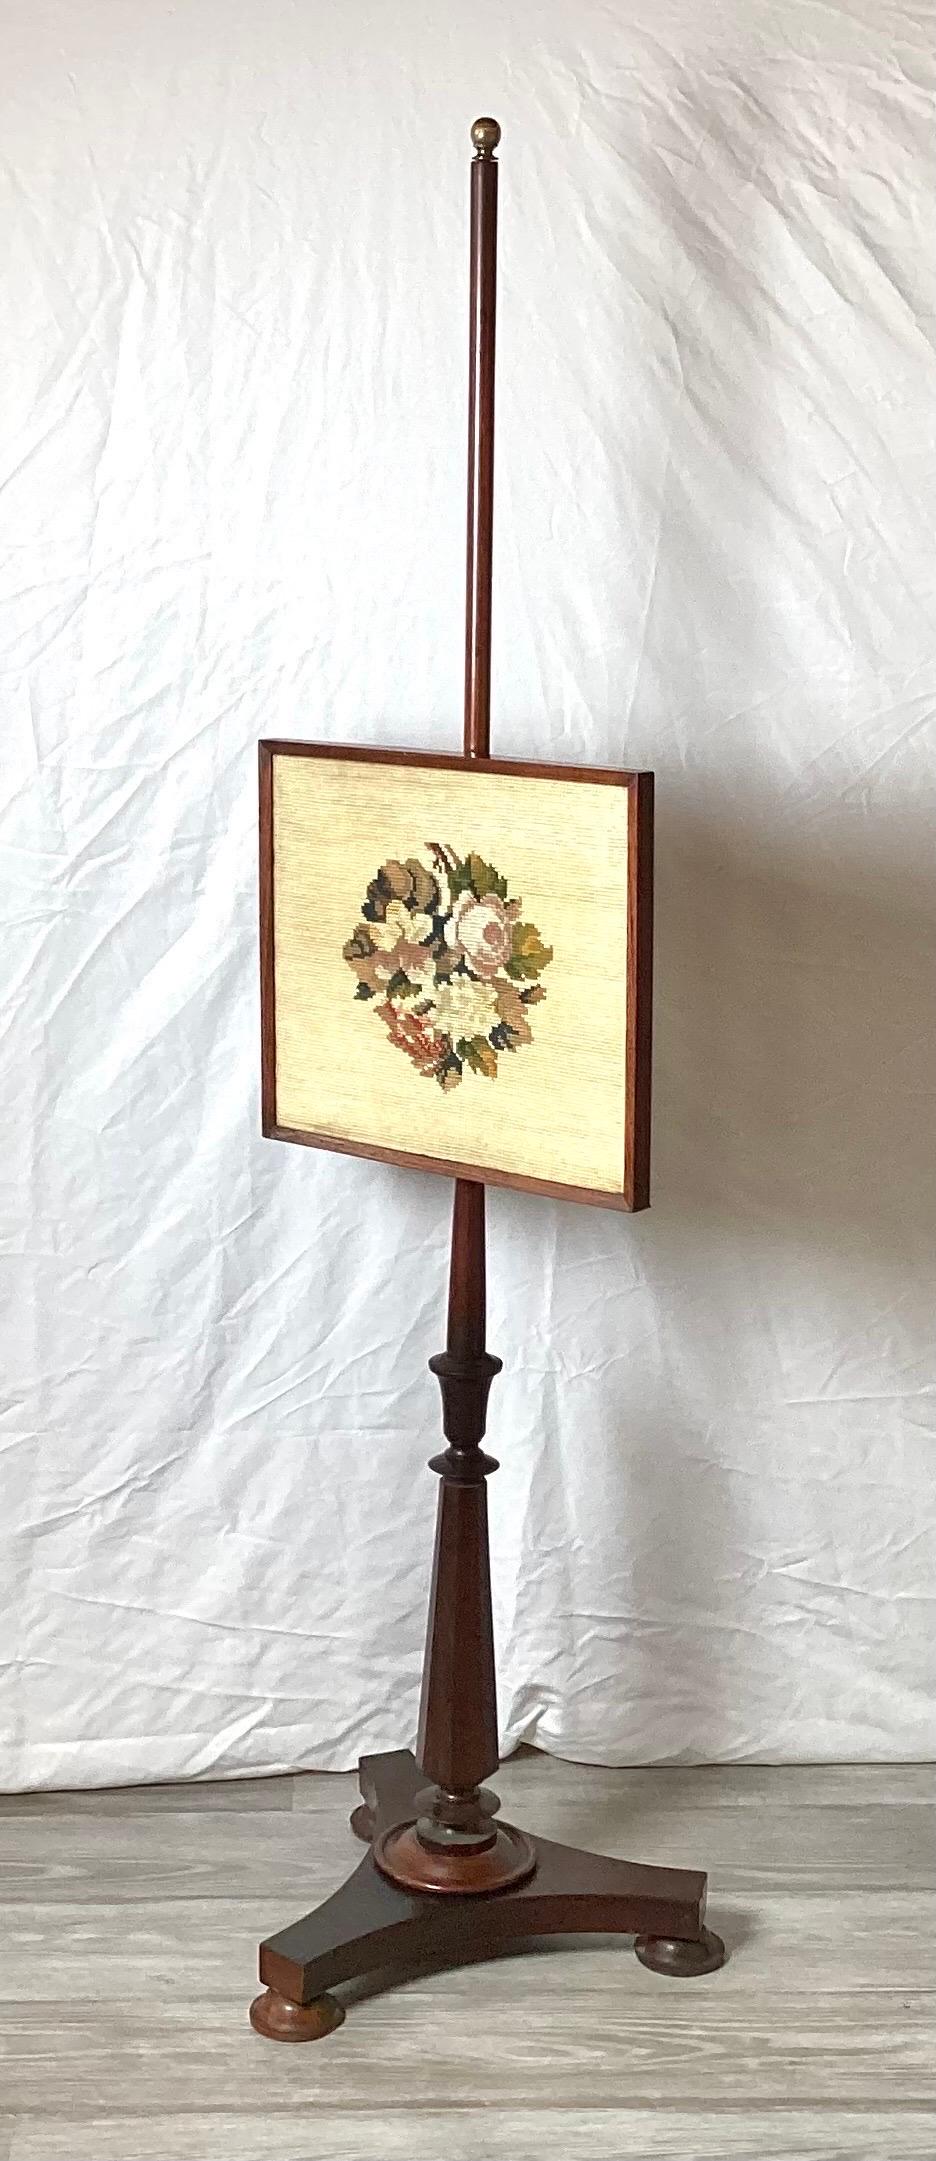 Charming antique American fire pole screen with hand made wool needlepoint panel. The slender pole with adjustable panel supported by a tripod plinth base.